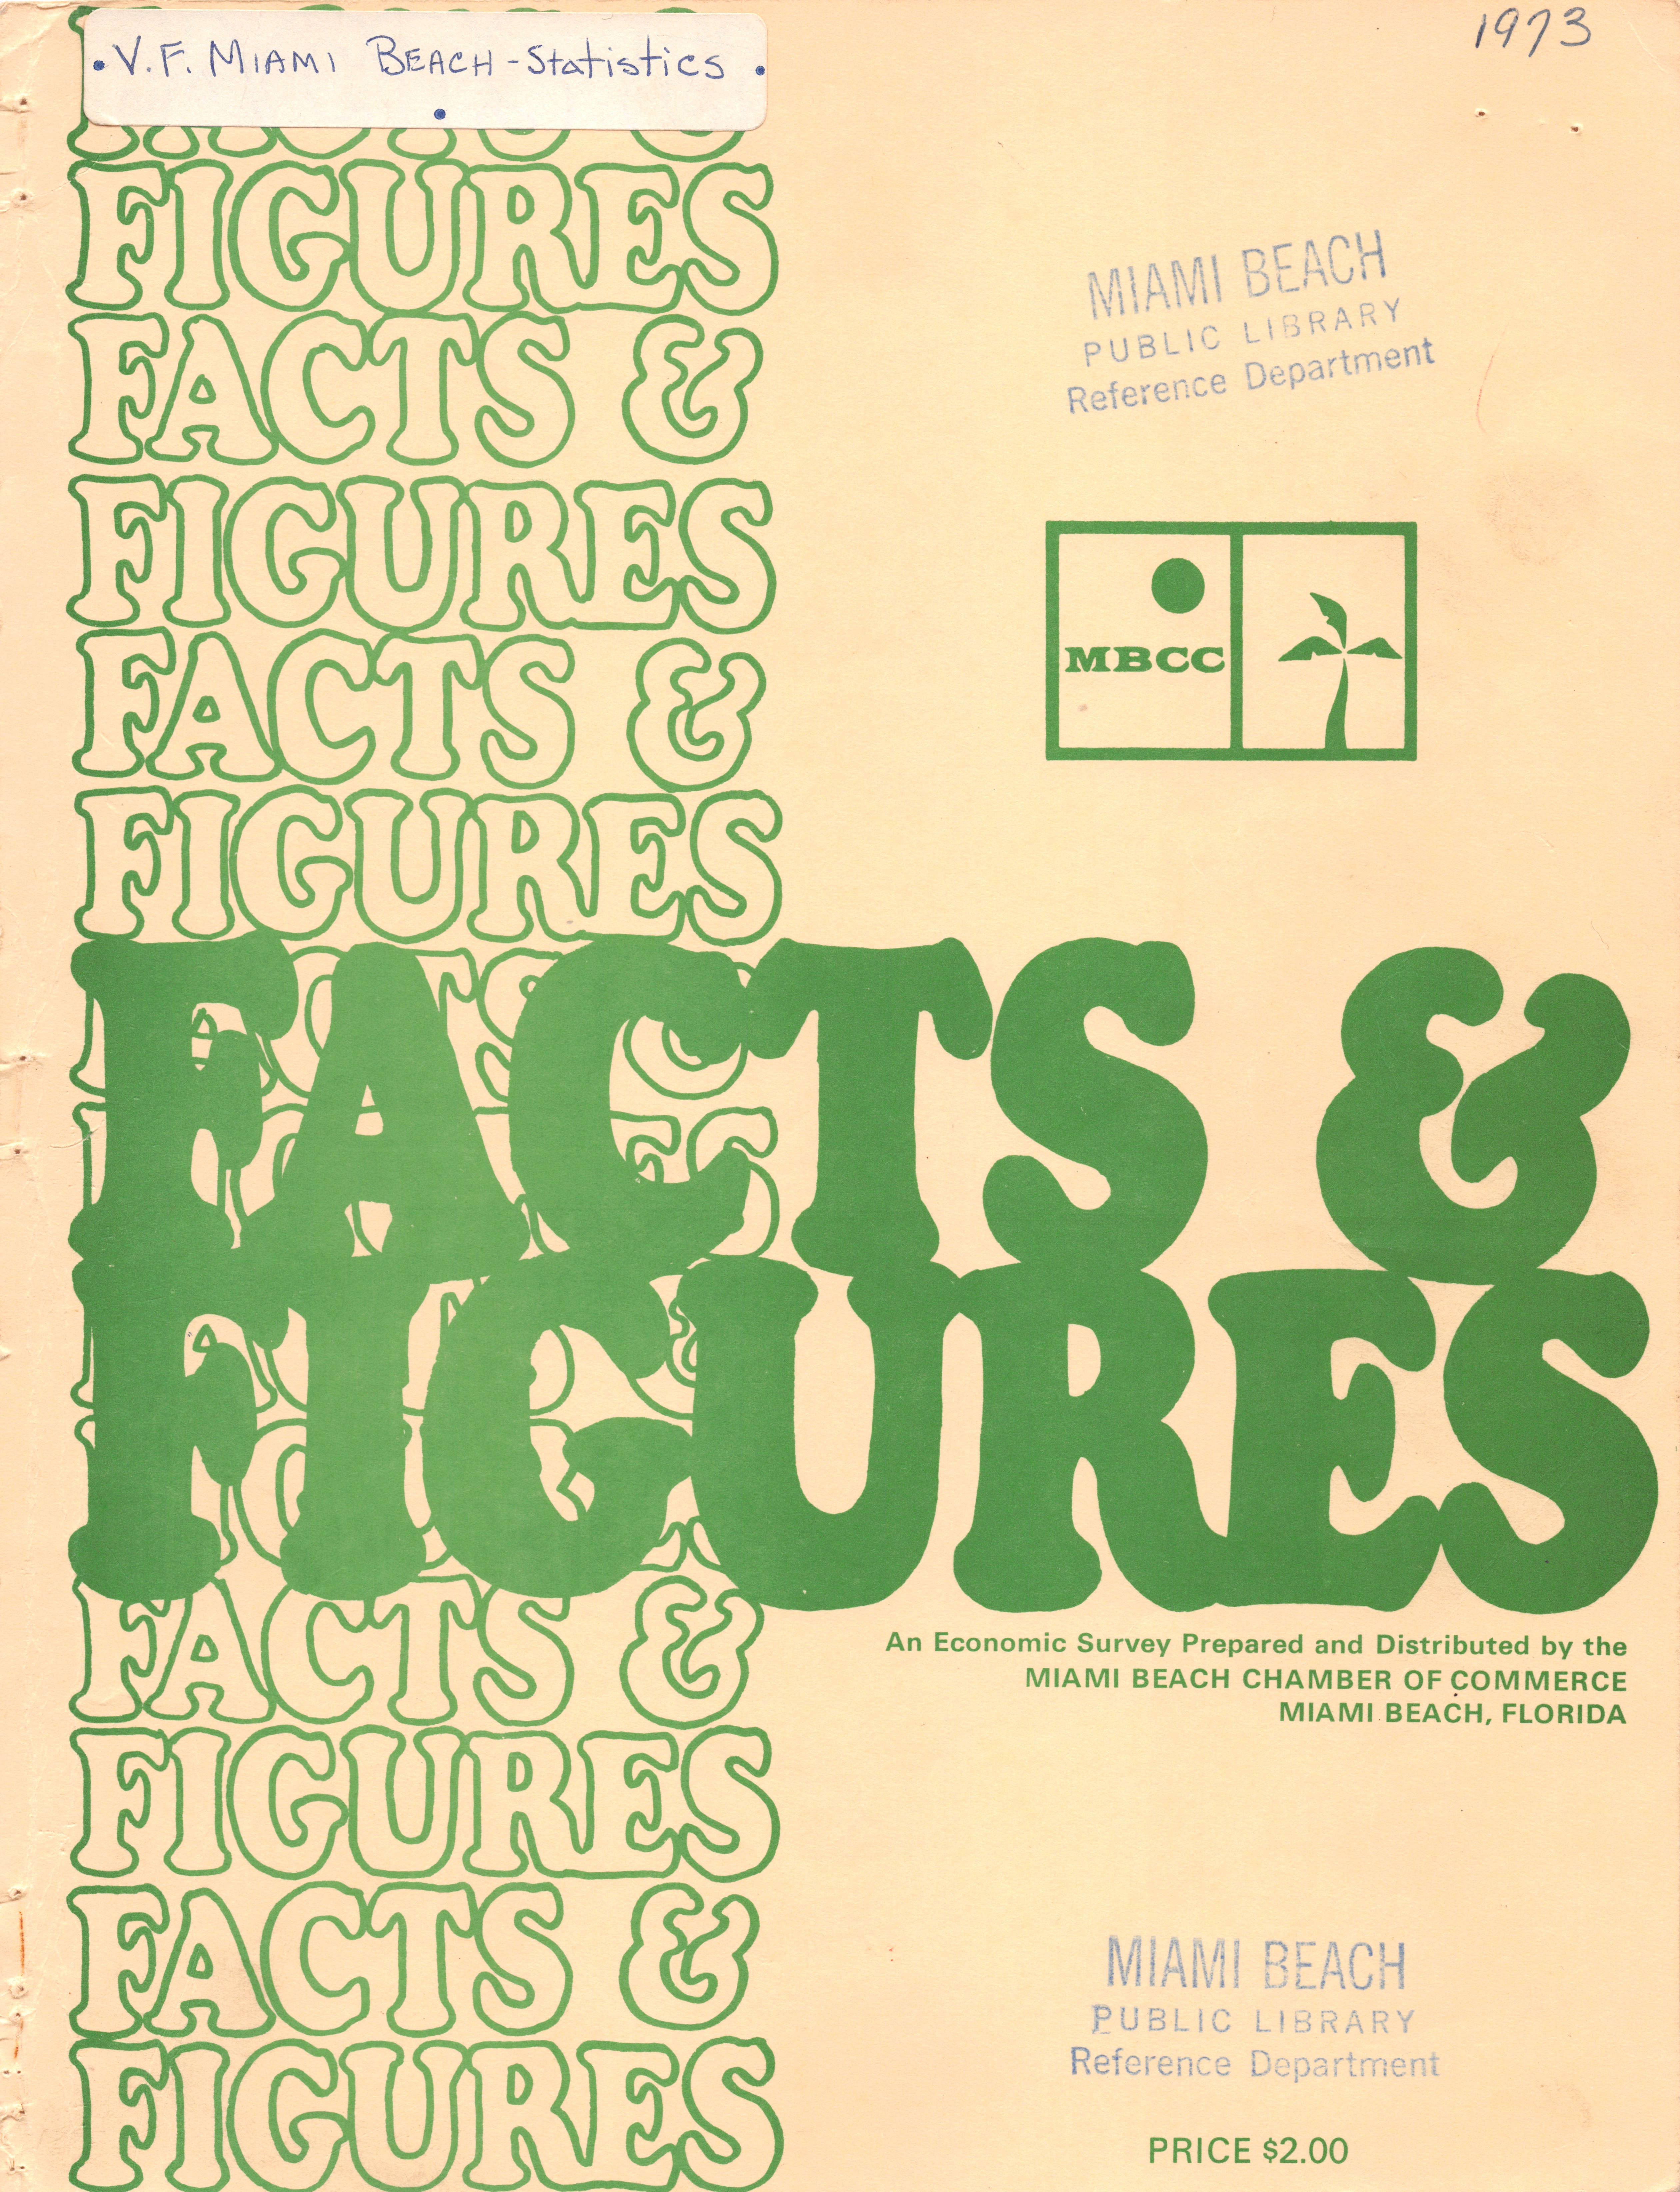 Facts & Figures: An Economic Survey 1971 - Typescript, cover: Facts & Figures: An Economic Survey Prepared and Distributed by the Miami Beach Chamber of Commerce Miami Beach, Florida